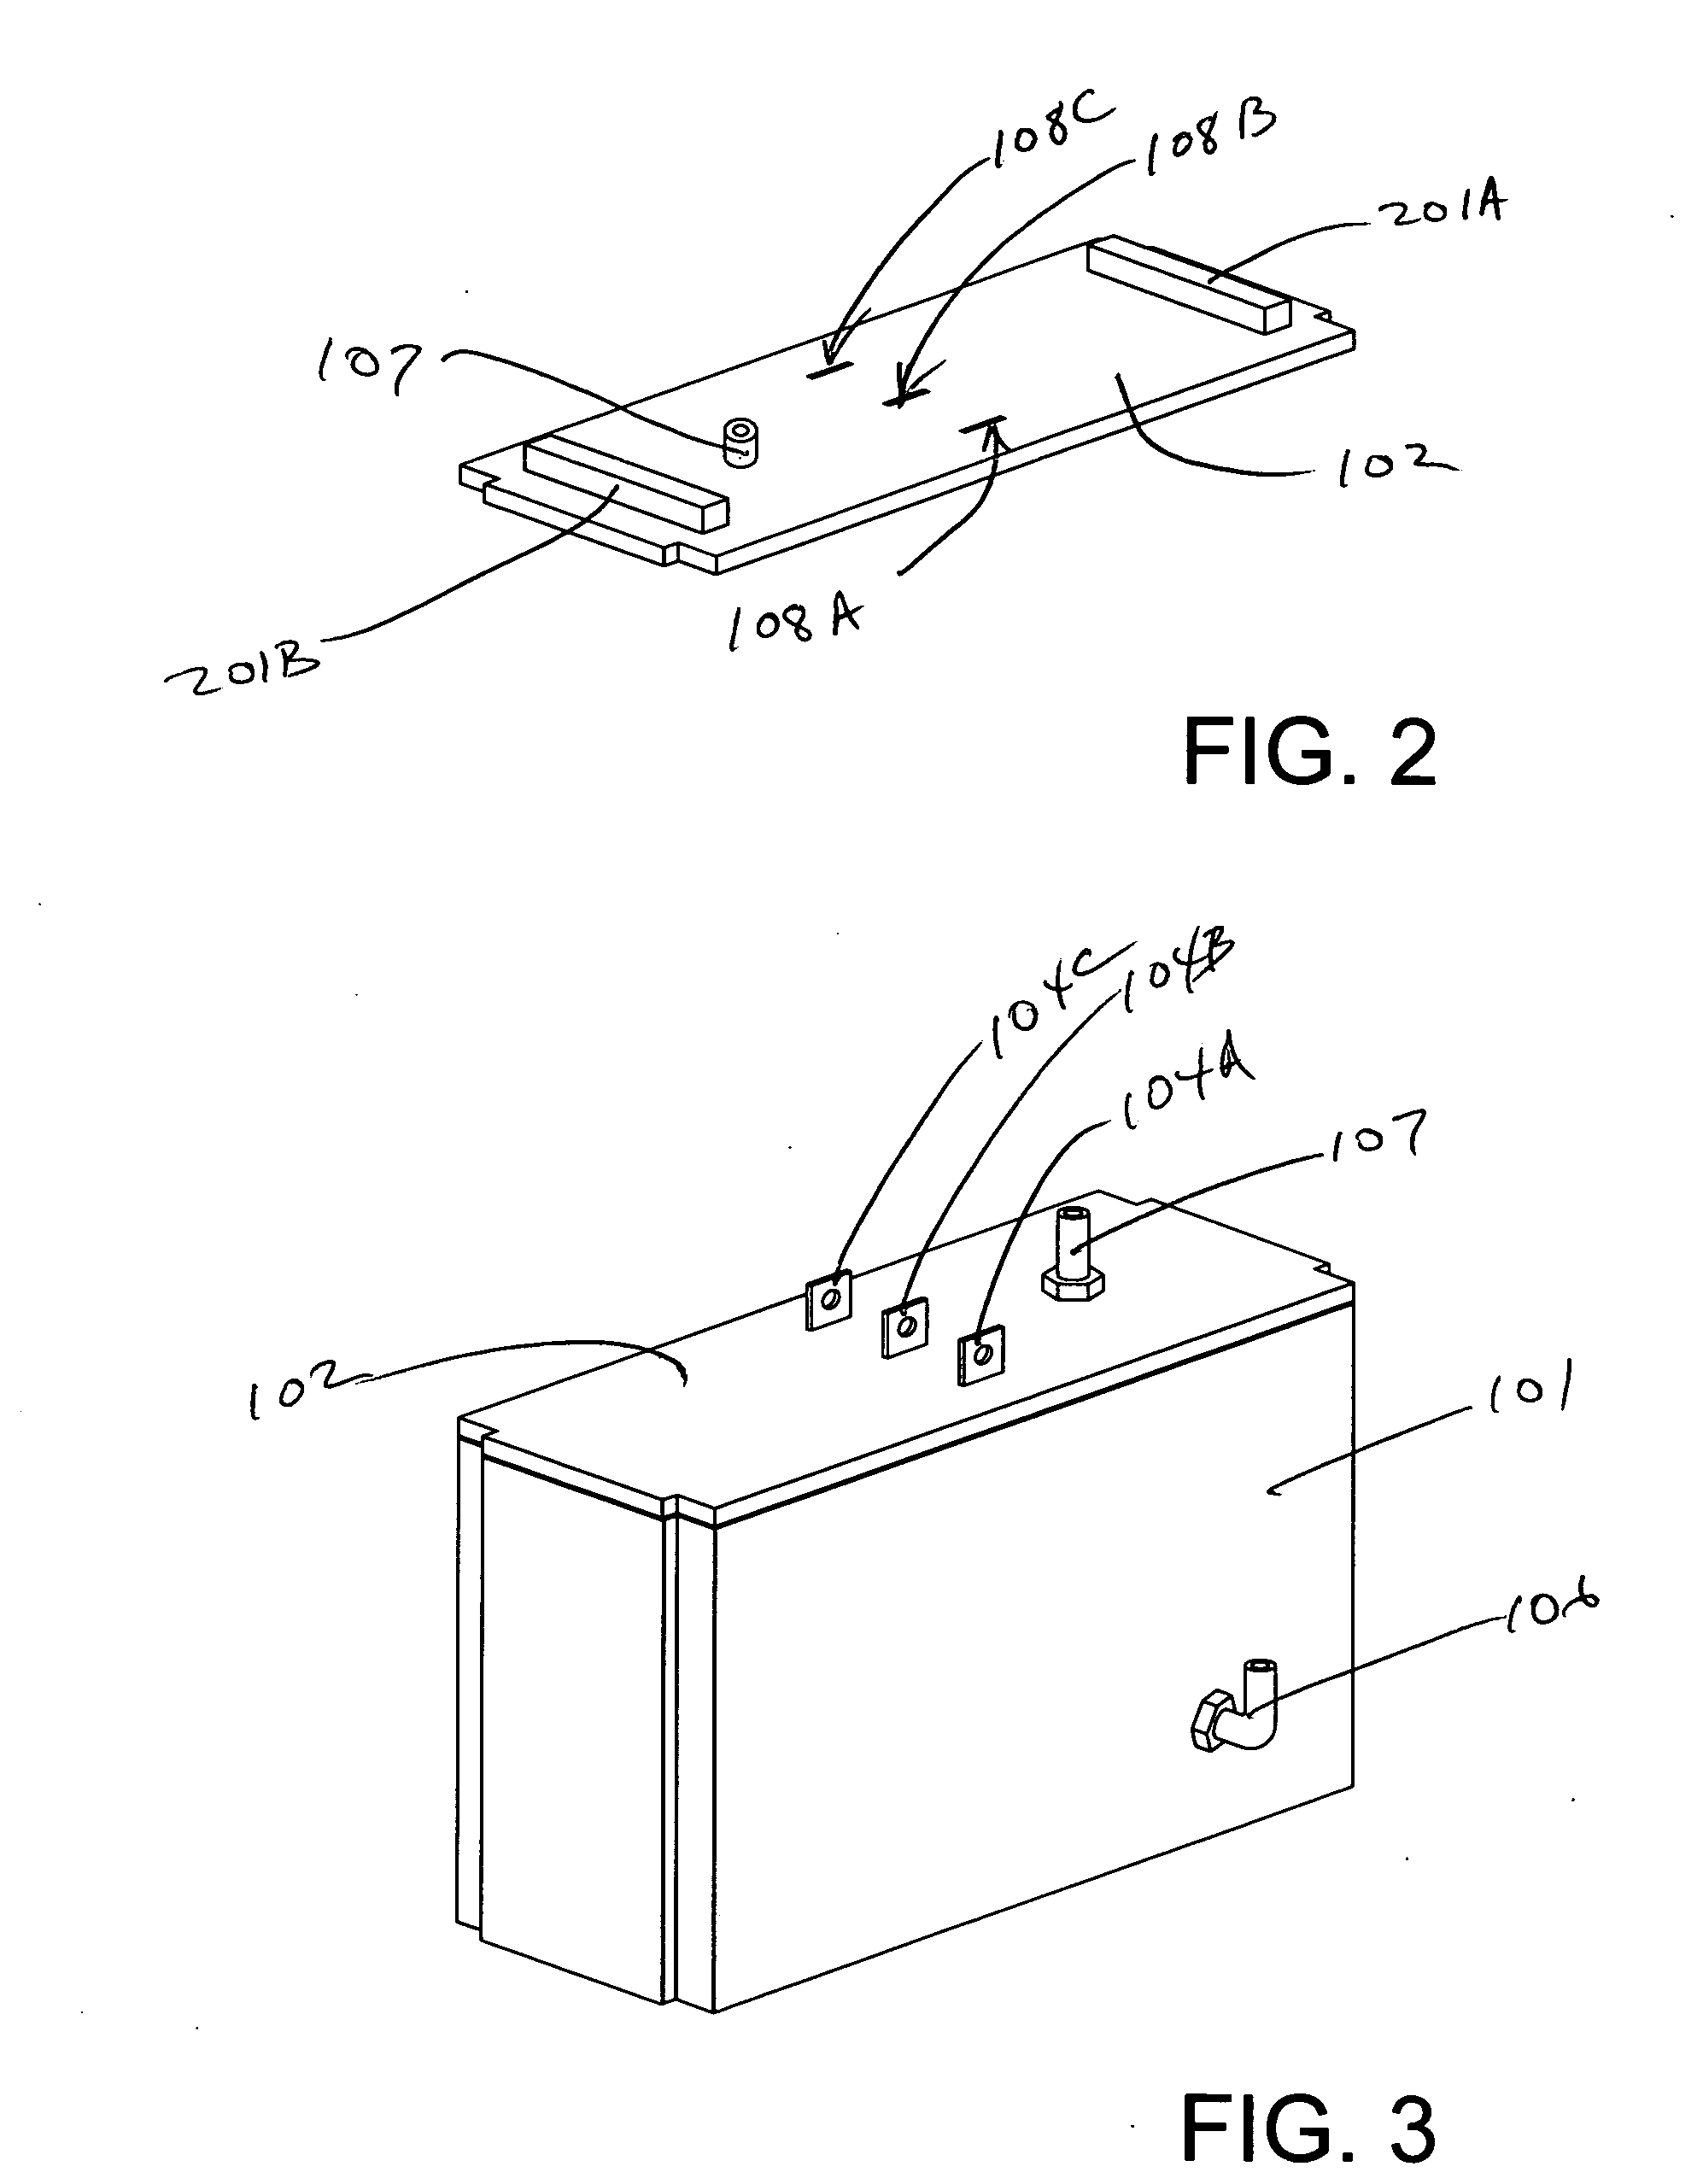 Hydrogen and oxygen generator having semi-isolated series cell construction